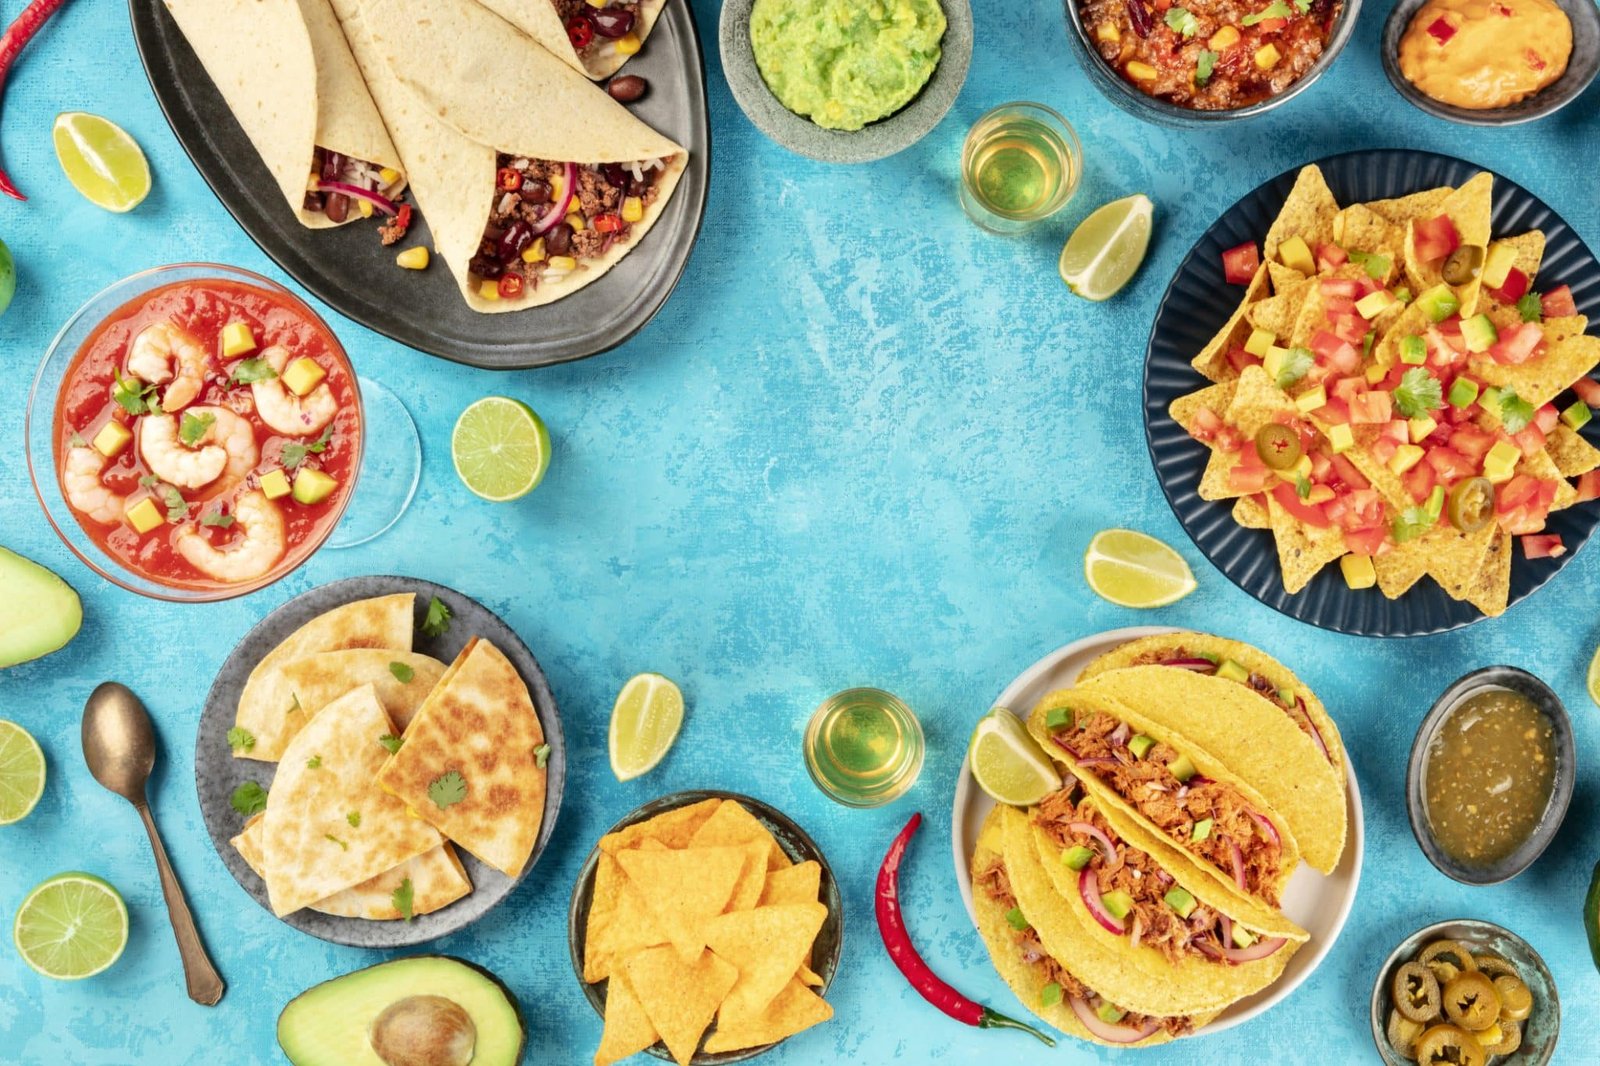 Mexican food, many dishes of the cuisine of Mexico, flat lay, shot from the top on a vibrant blue background, forming a frame with a place for text. Nachos, quesadillas, guacamole, burritos etc